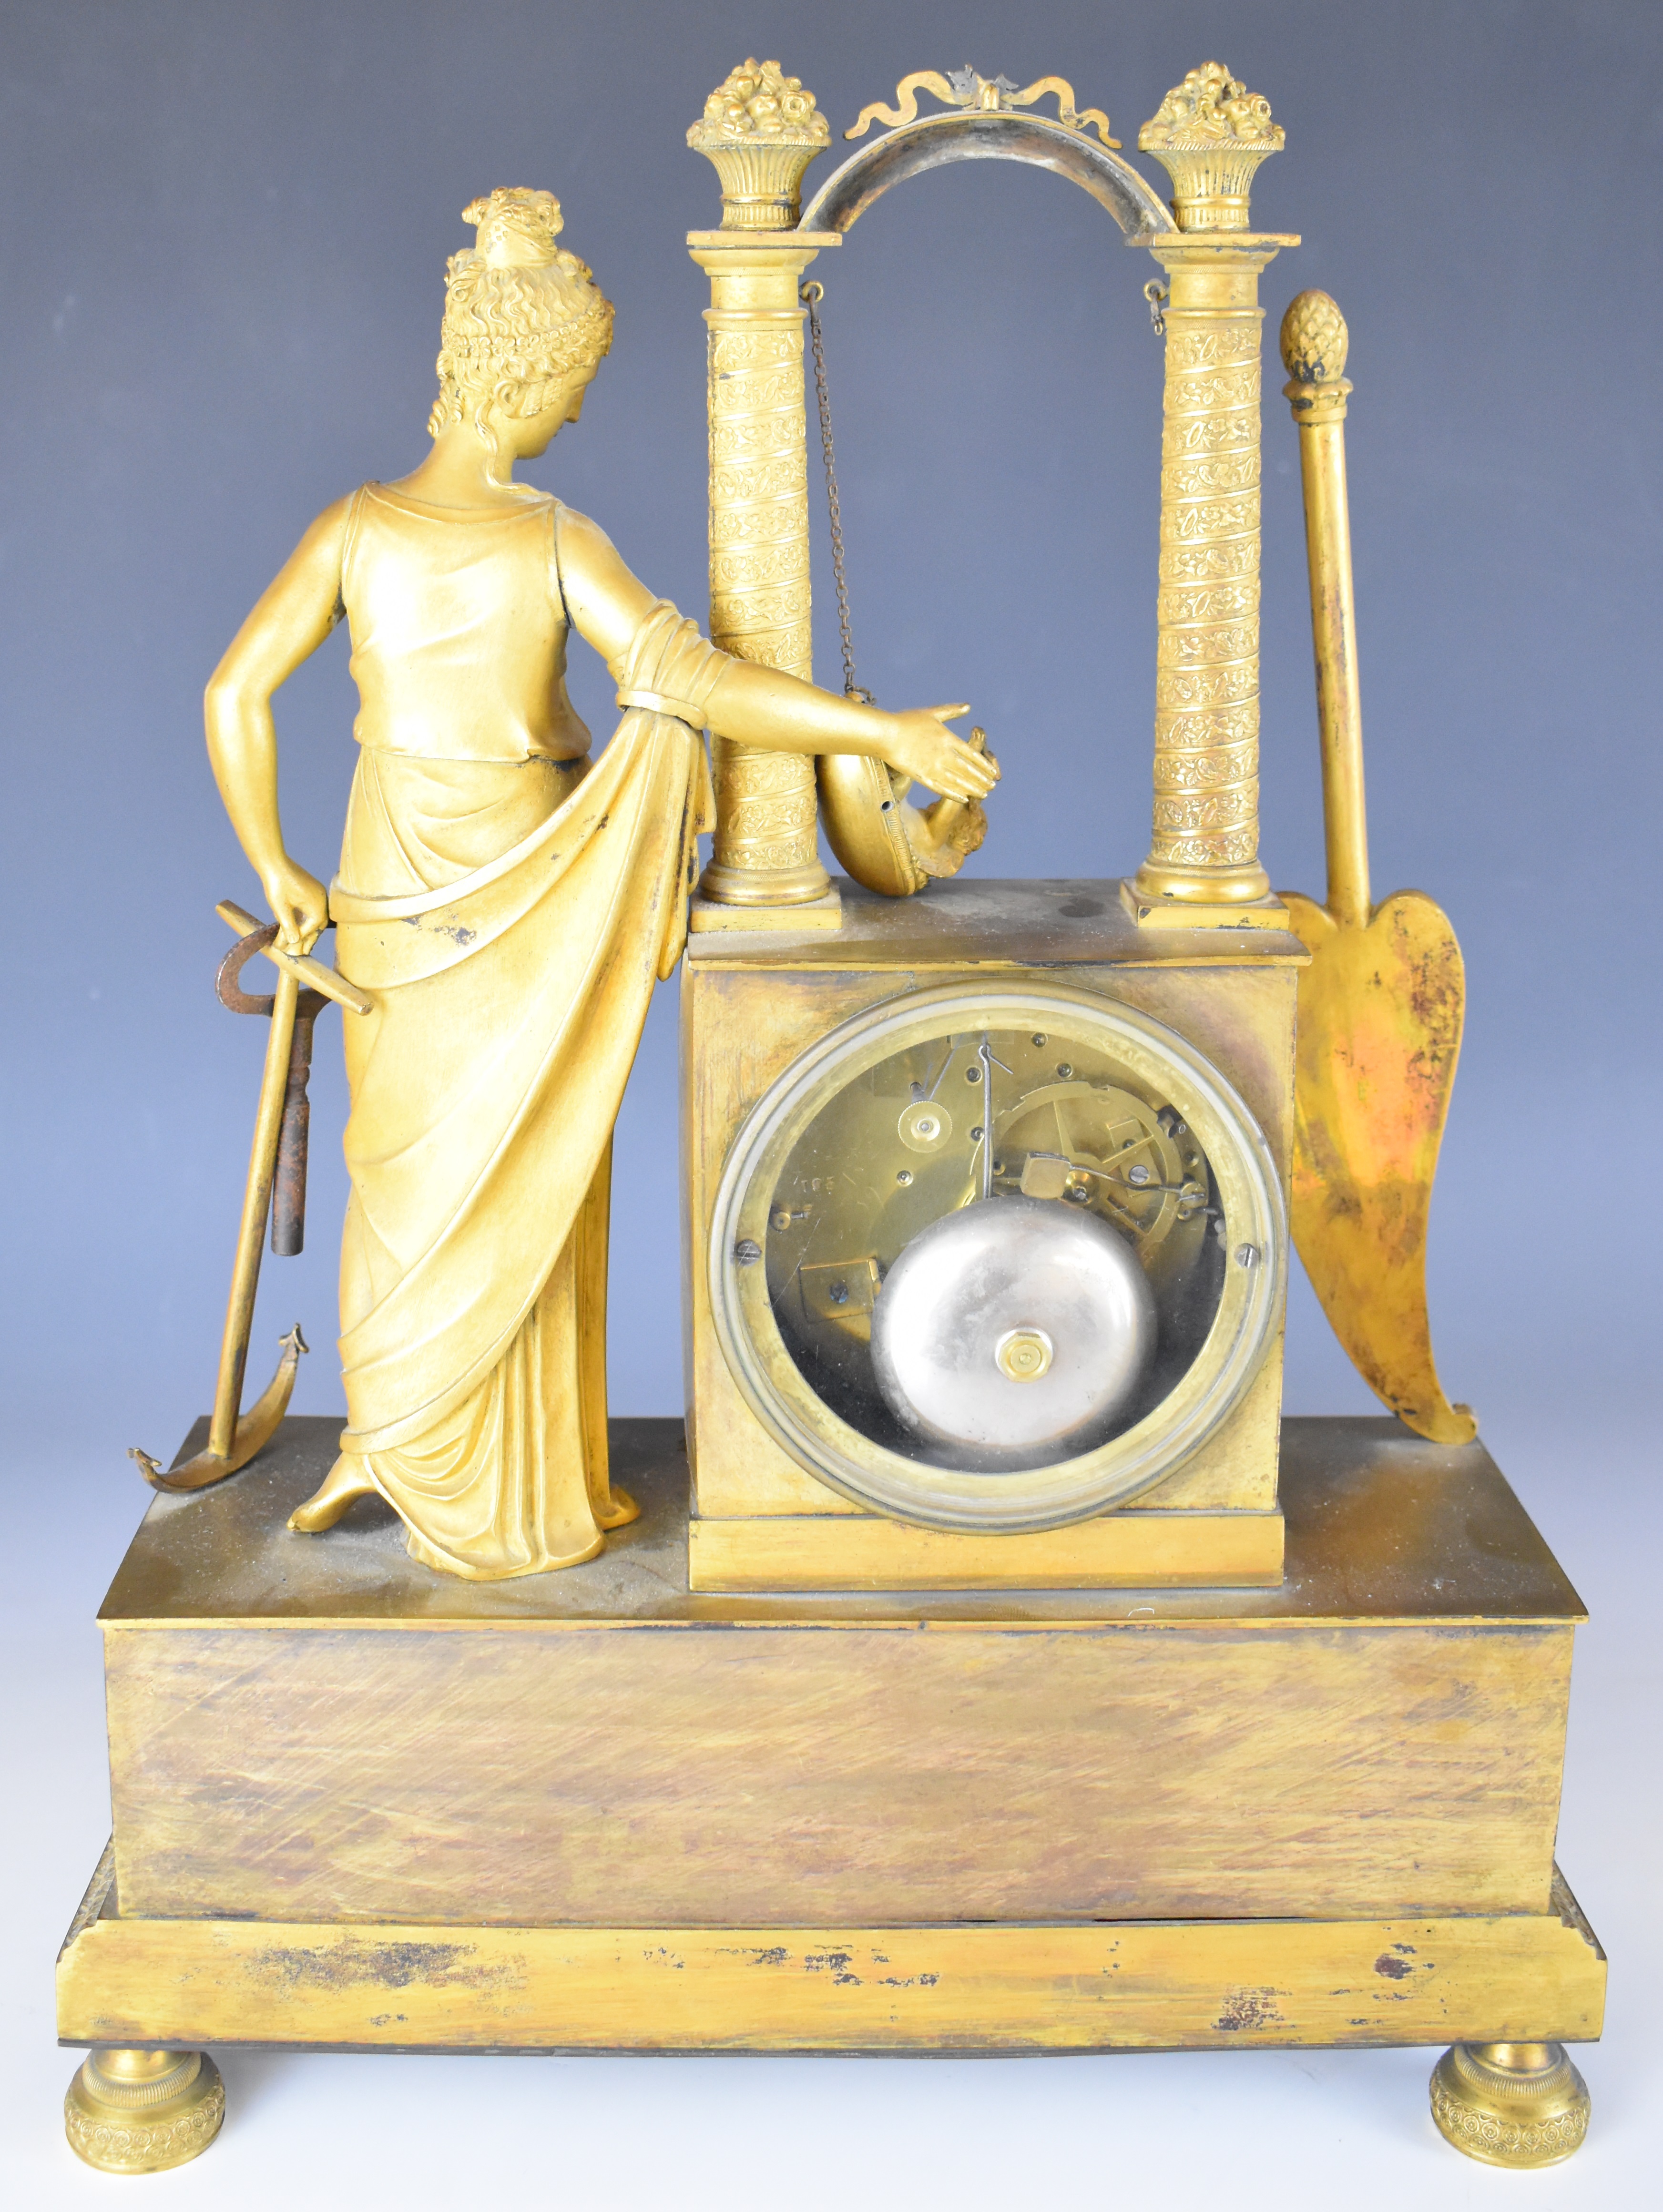 19thC gilt metal figural mantel clock with Cupid hanging beneath a bower, the two train movement - Image 9 of 12